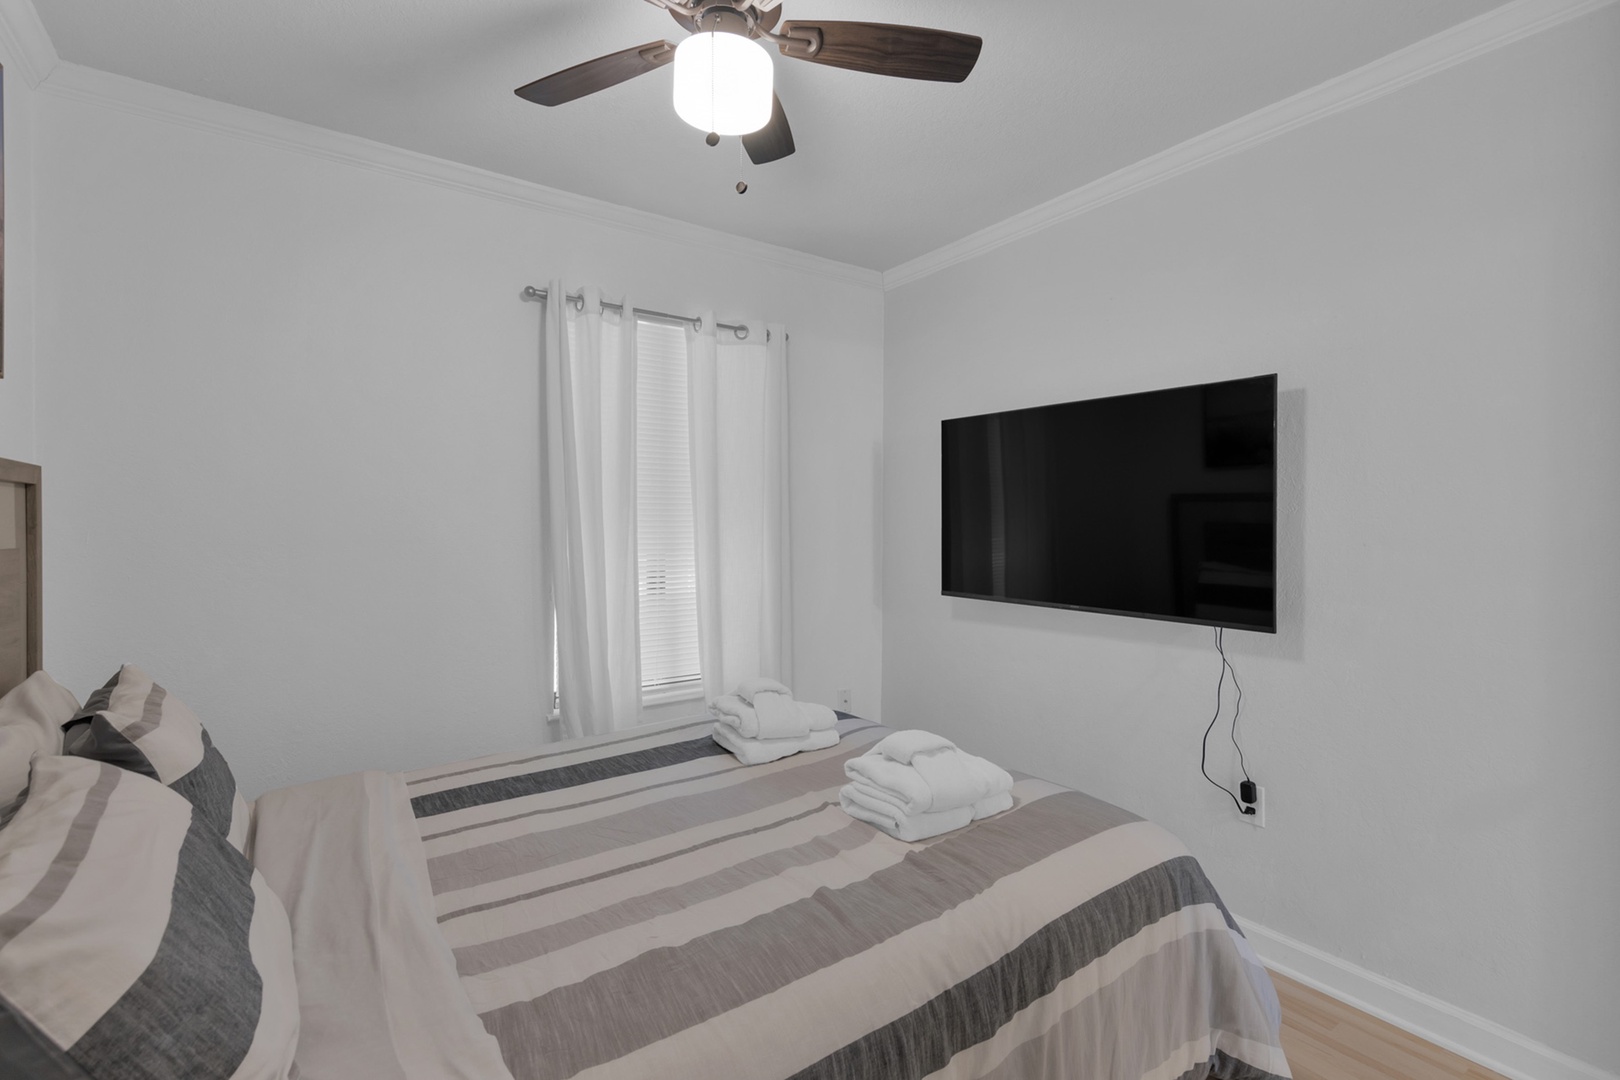 The private bedroom features a plush queen bed & Smart TV